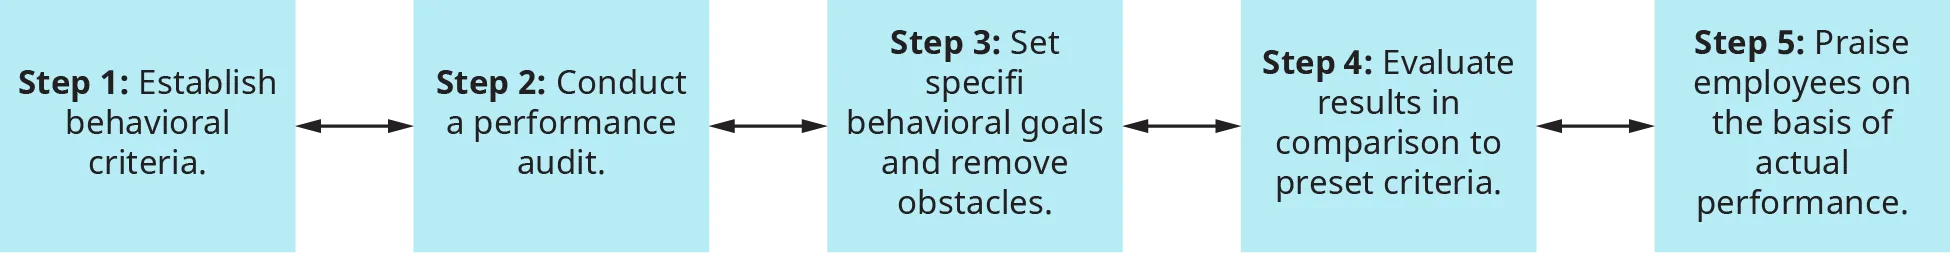 A diagram illustrates the steps involved in implementing a behavior modification program.